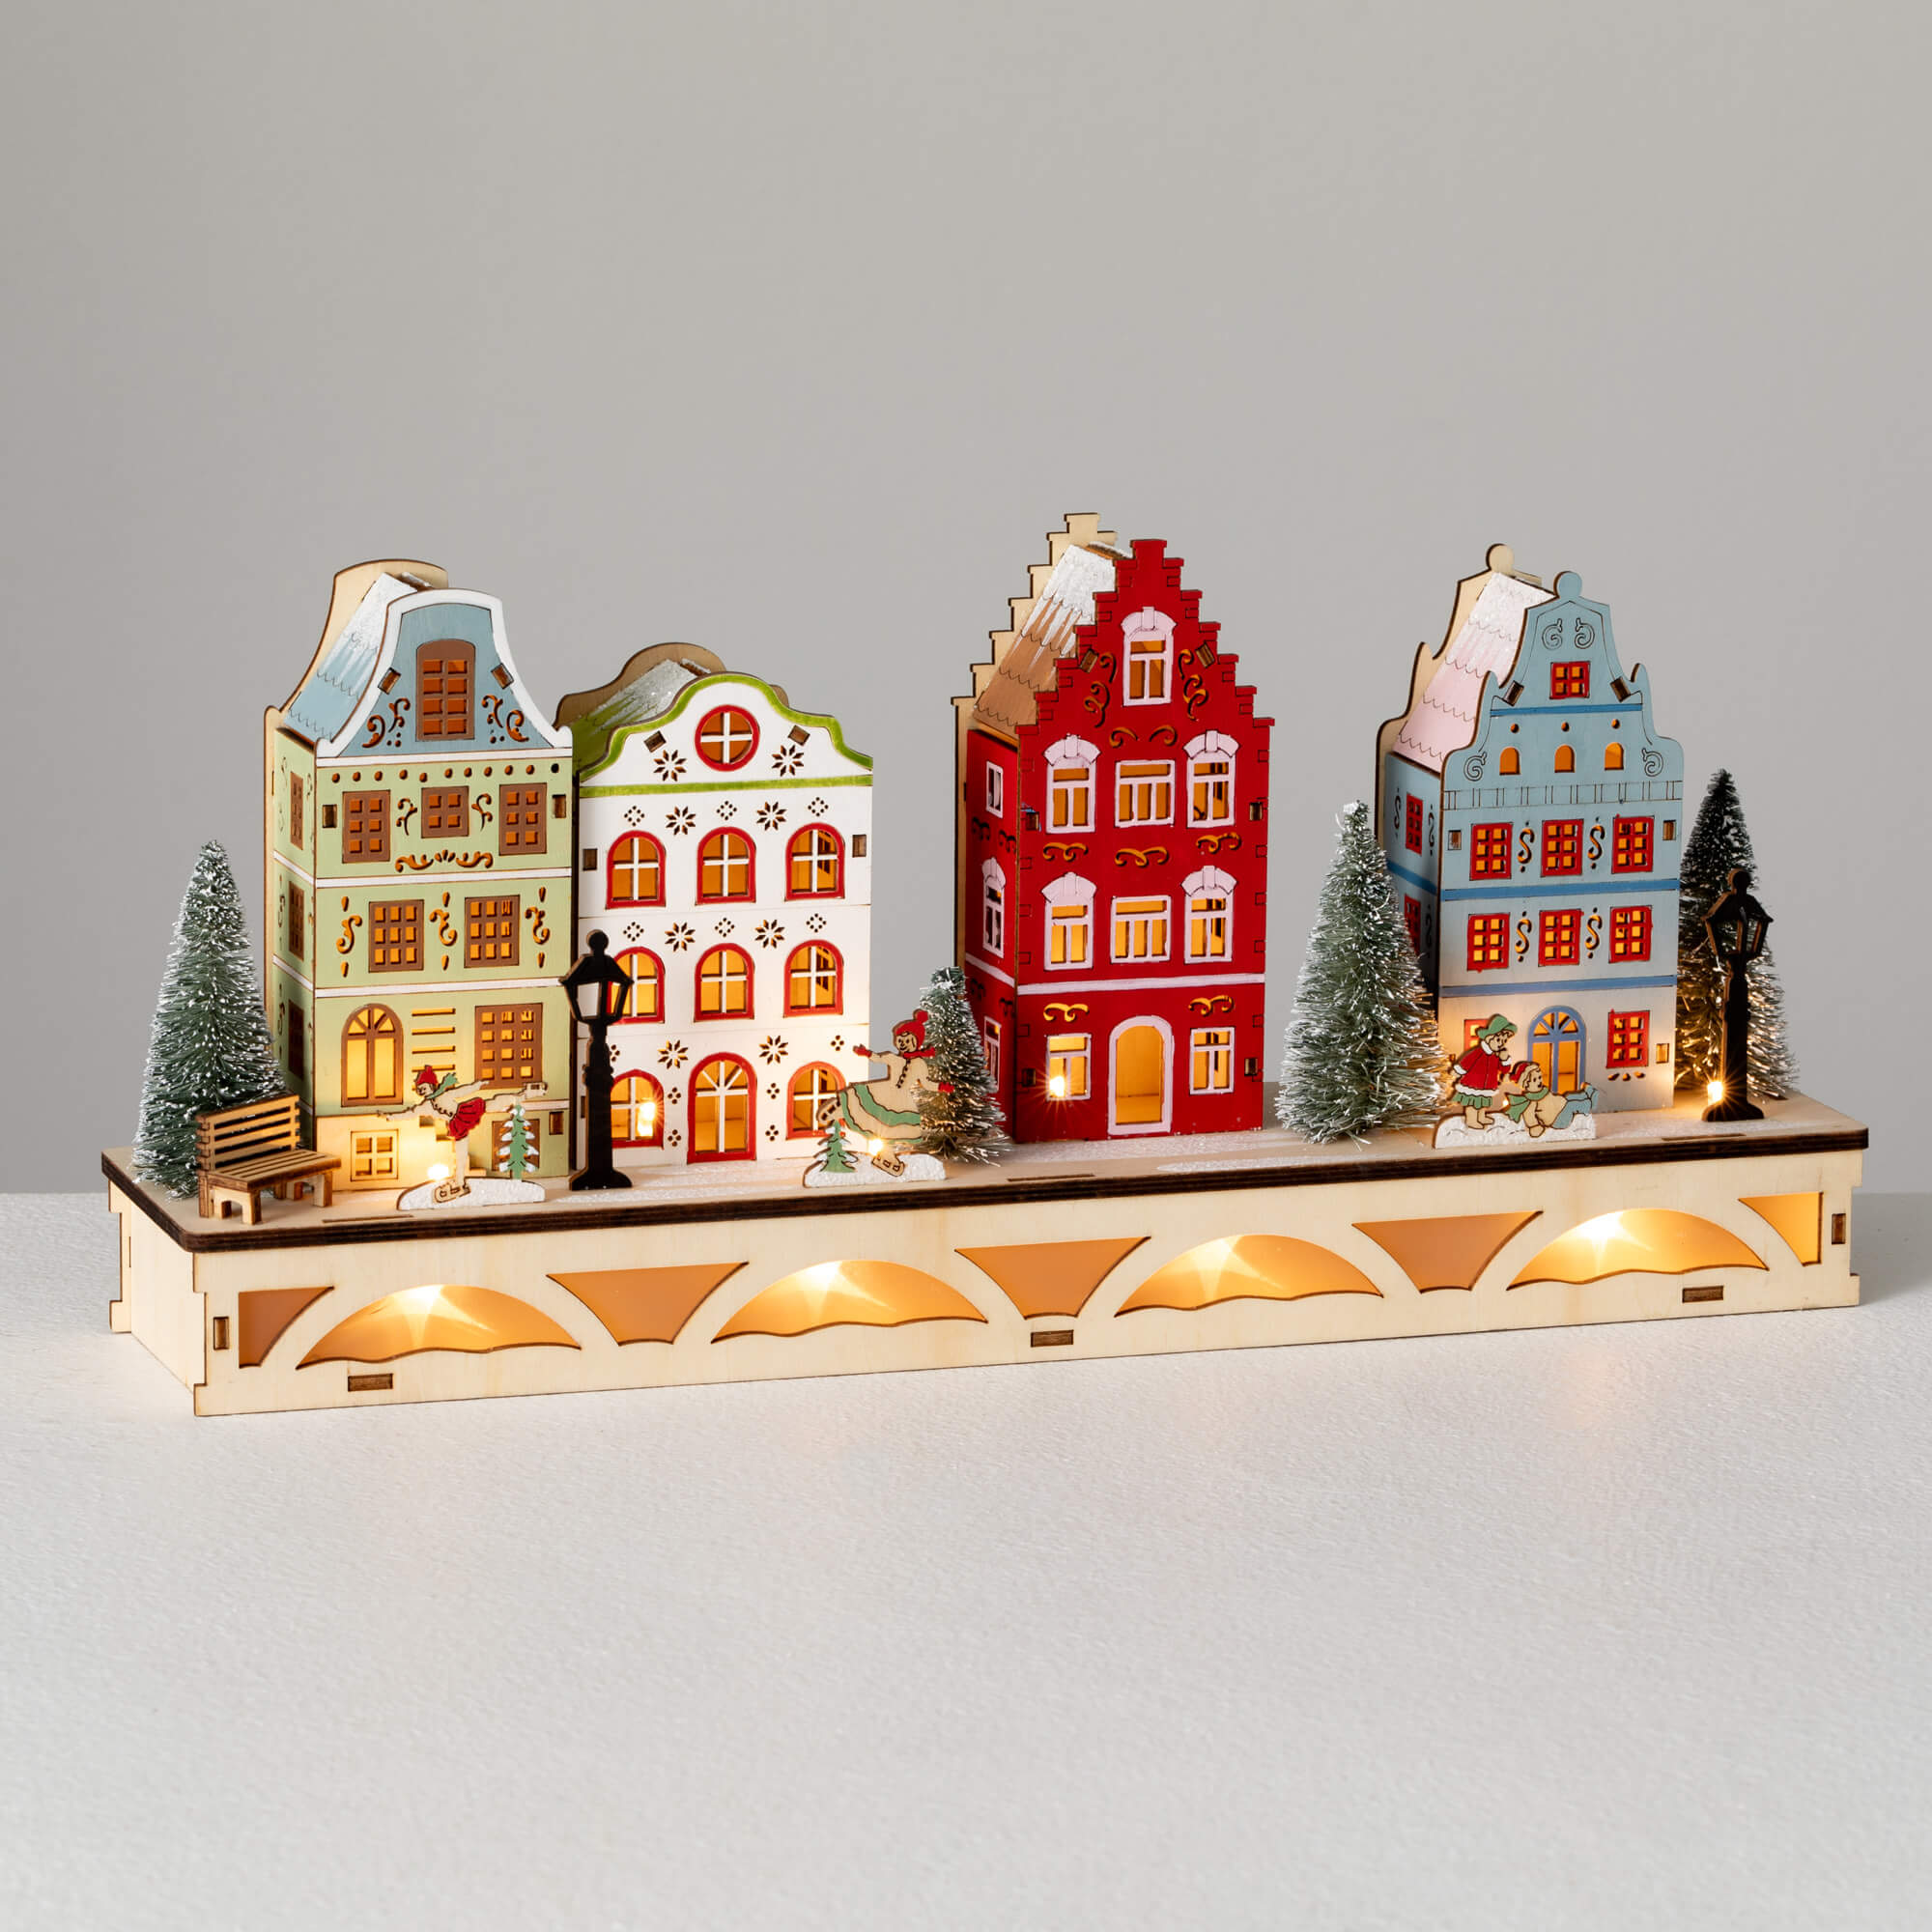 COLORFUL LIGHTED HOUSE SCENE